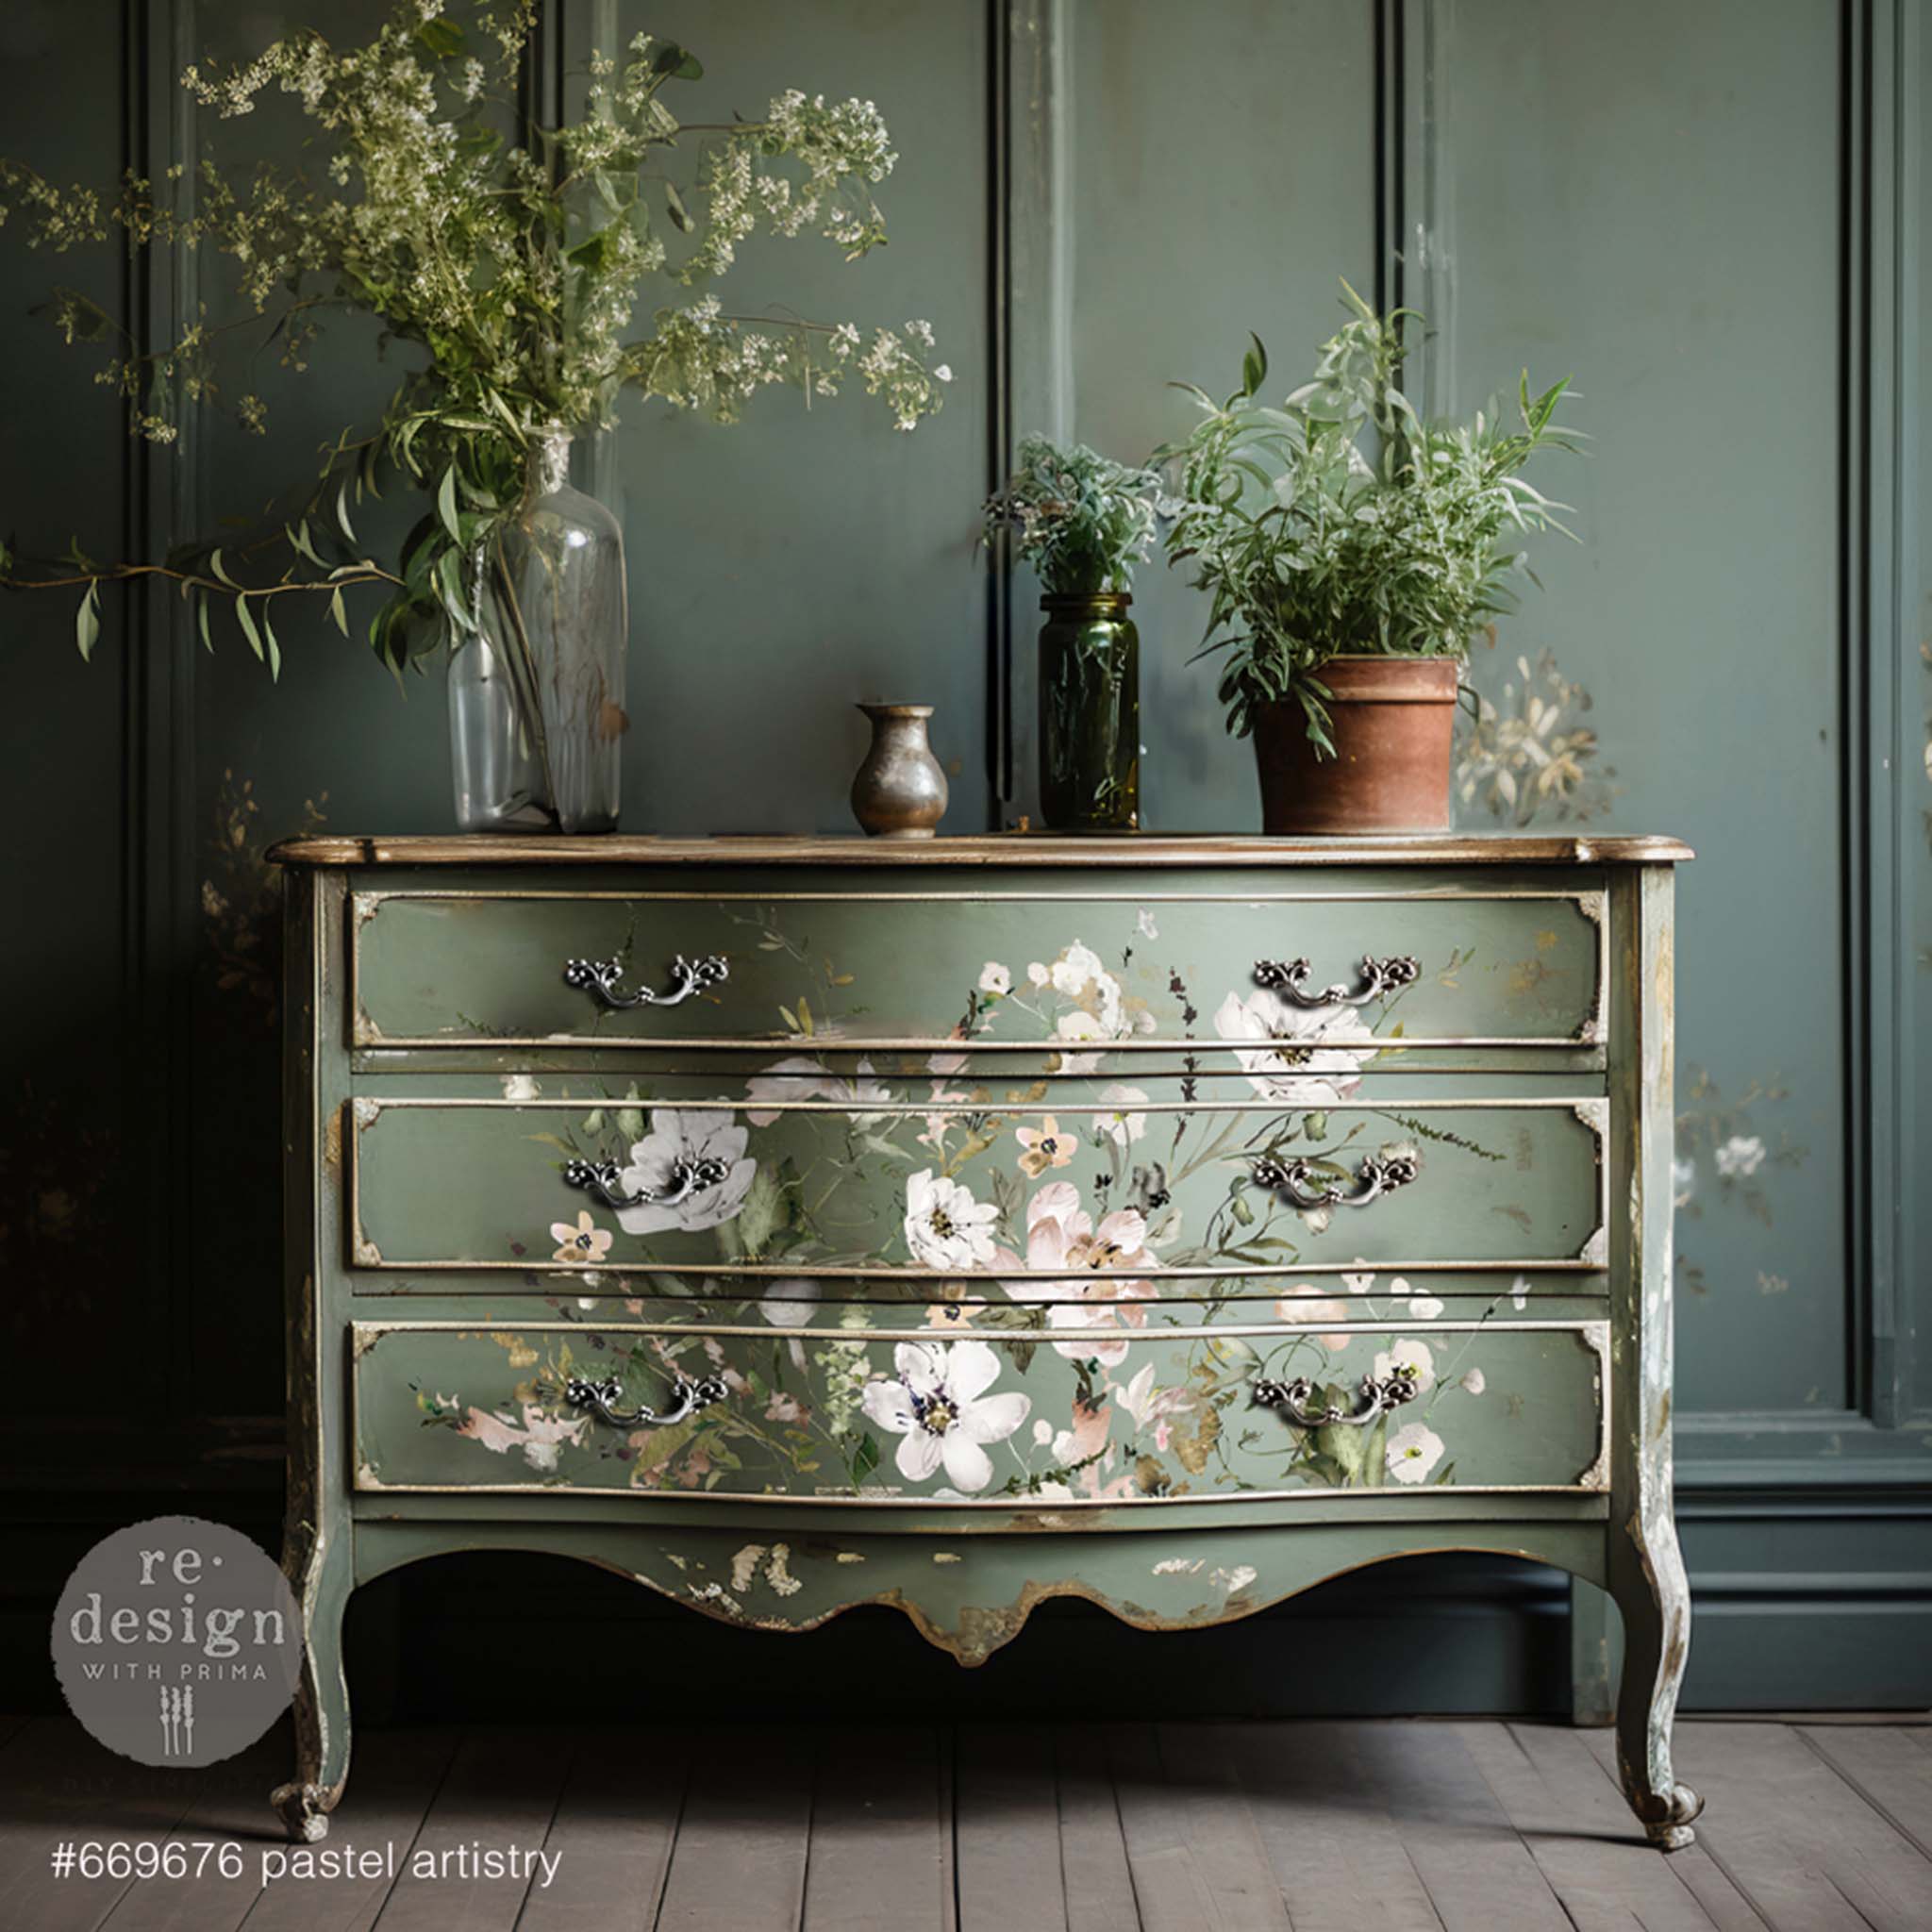 A vintage 3-drawer dresser is painted sage green and features ReDesign with Prima's Pastel Artistry transfer on the drawers.